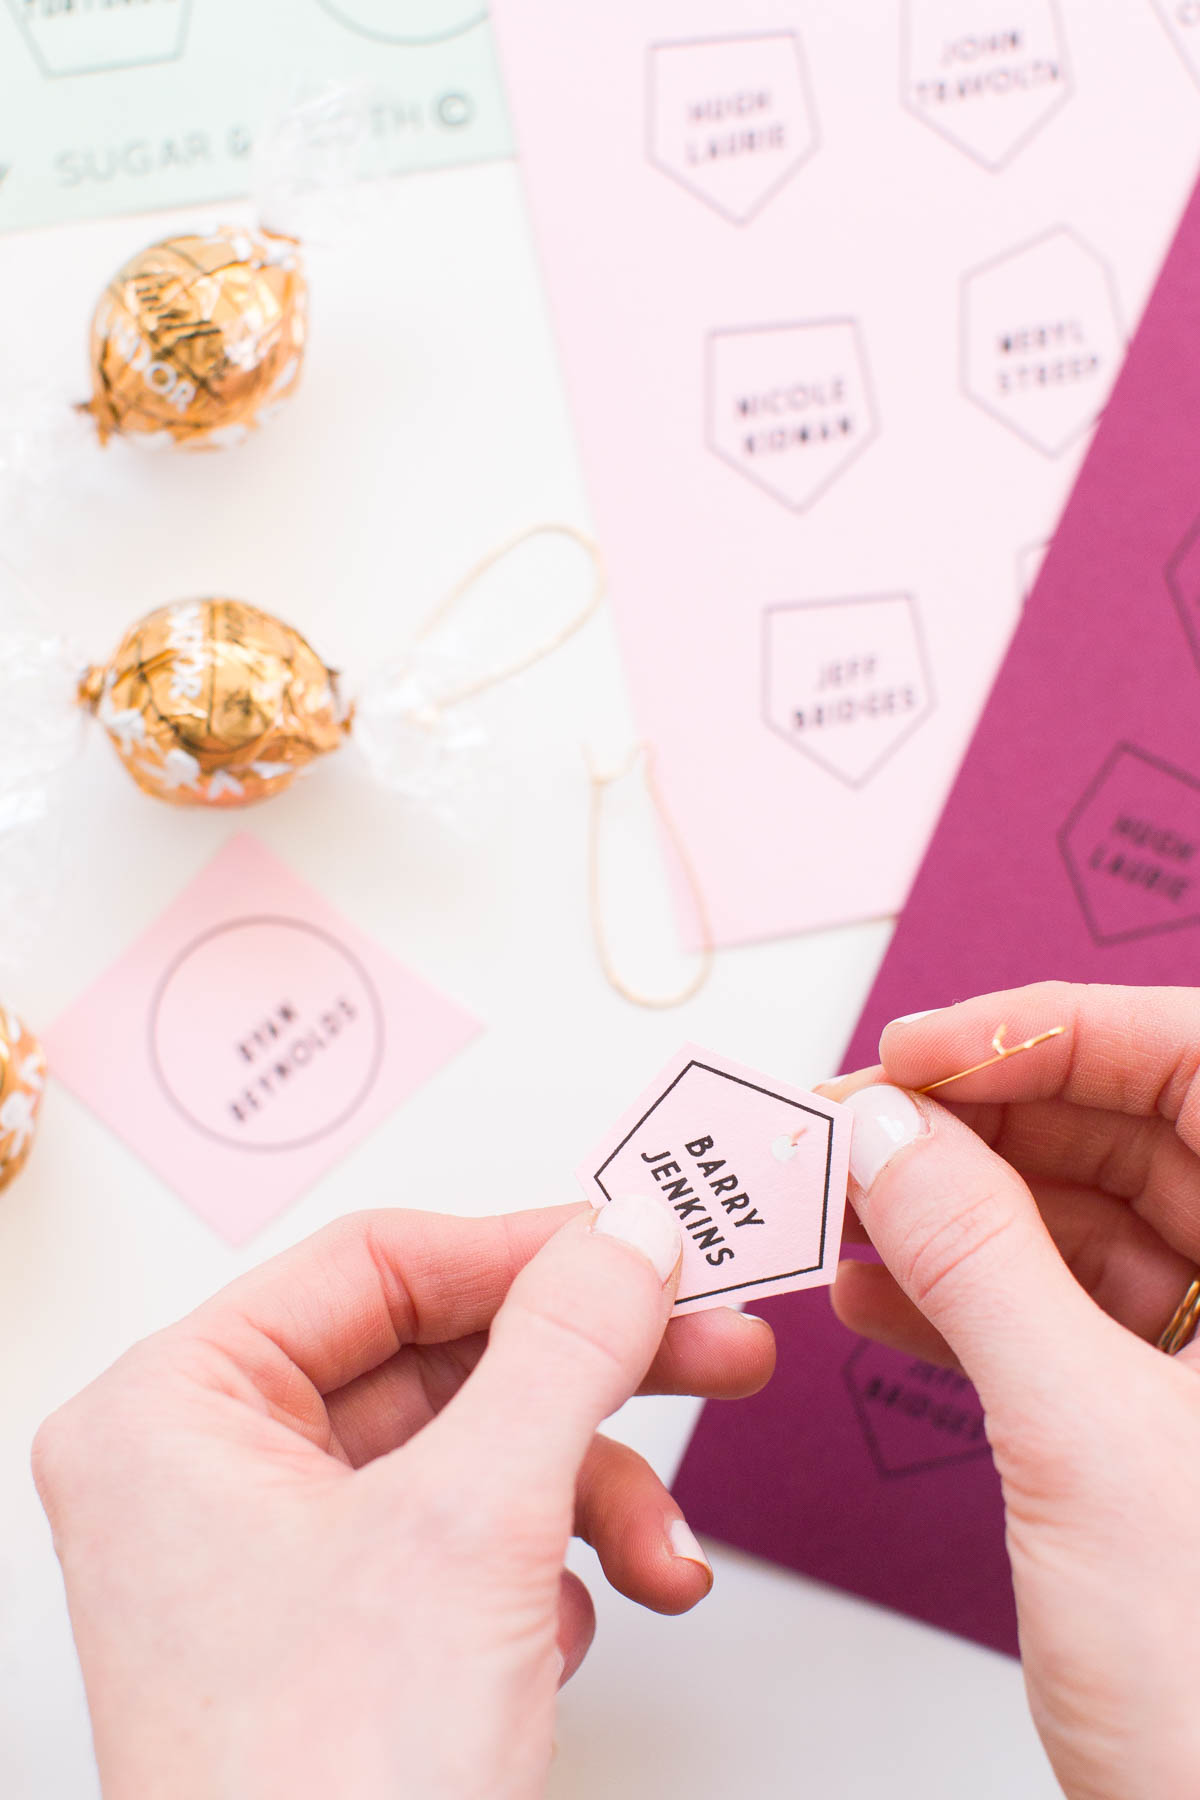 Printable DIY Golden Globes Drink Tags with Lindt Chocolate - by lifestyle blogger Ashley Rose of Sugar & Cloth in Houston, Texas